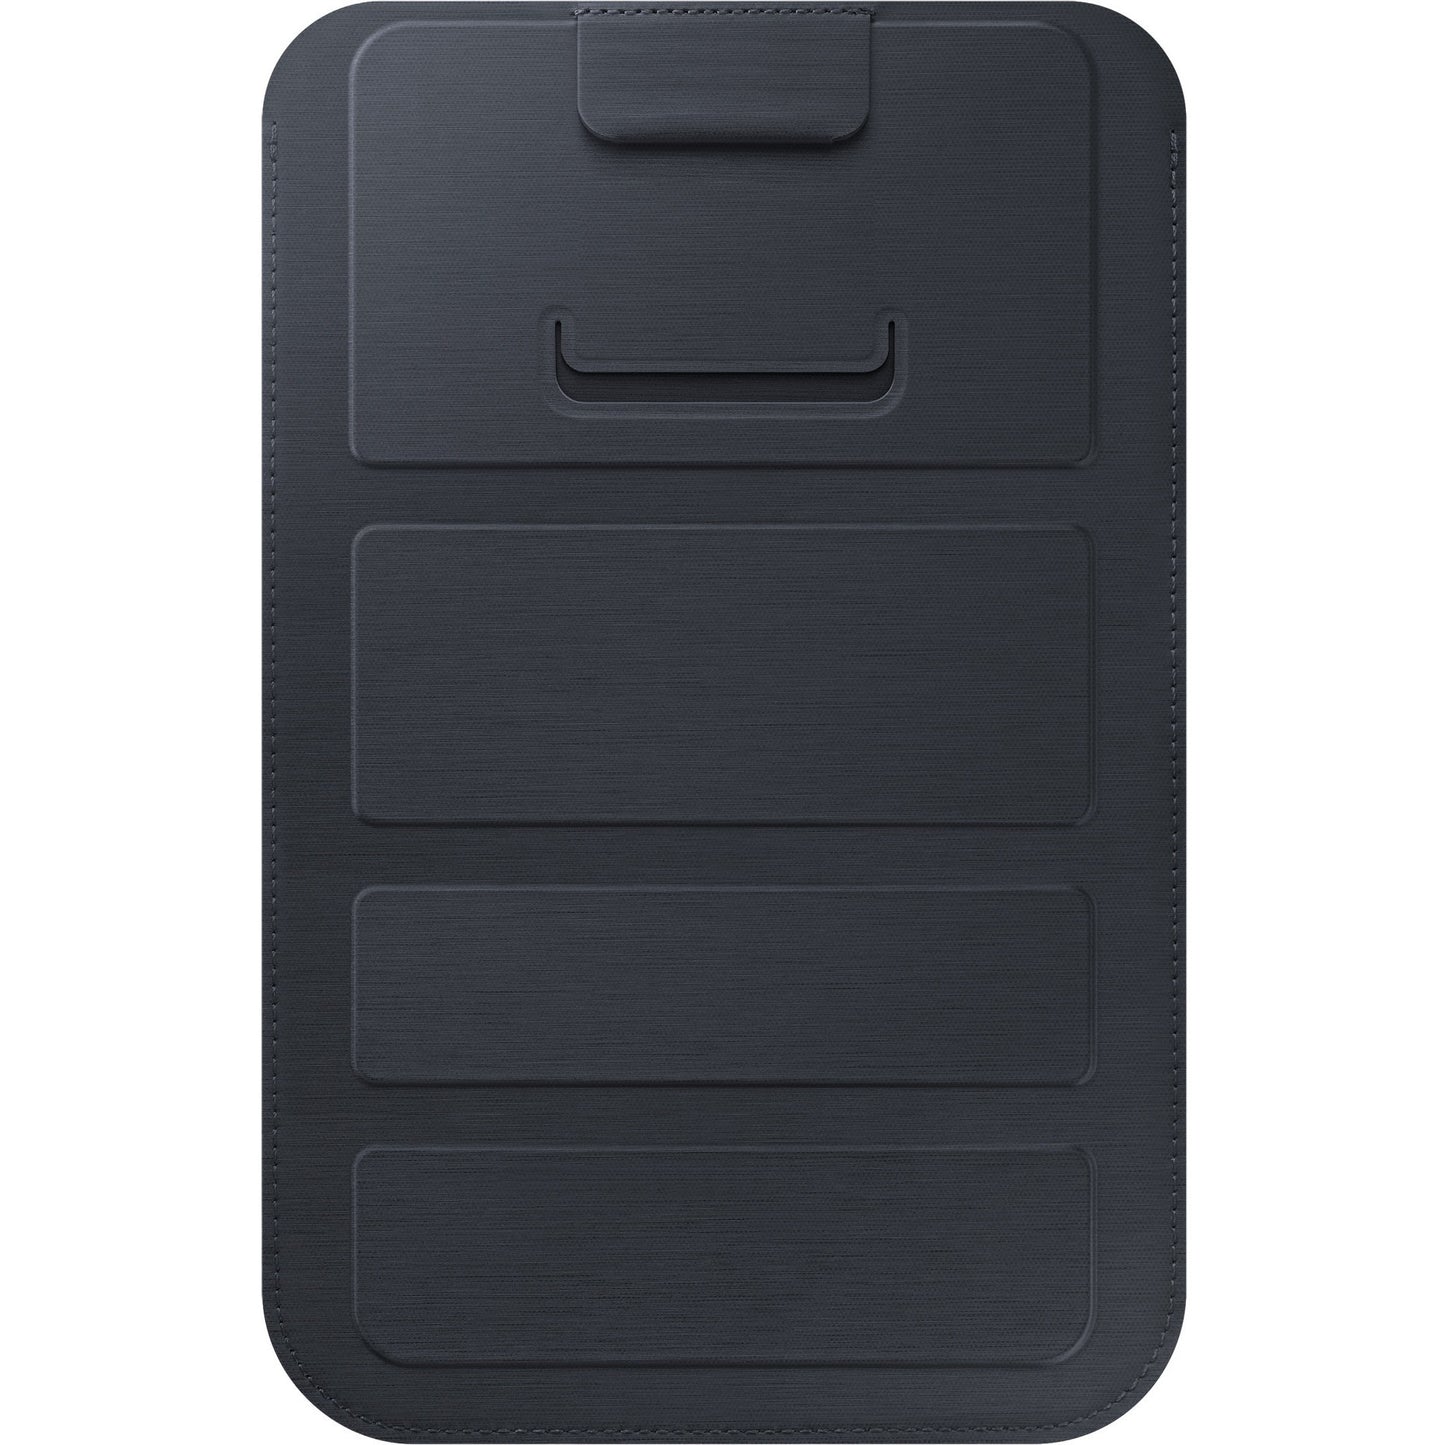 Samsung Carrying Case (Pouch) for 7" Tablet - Black